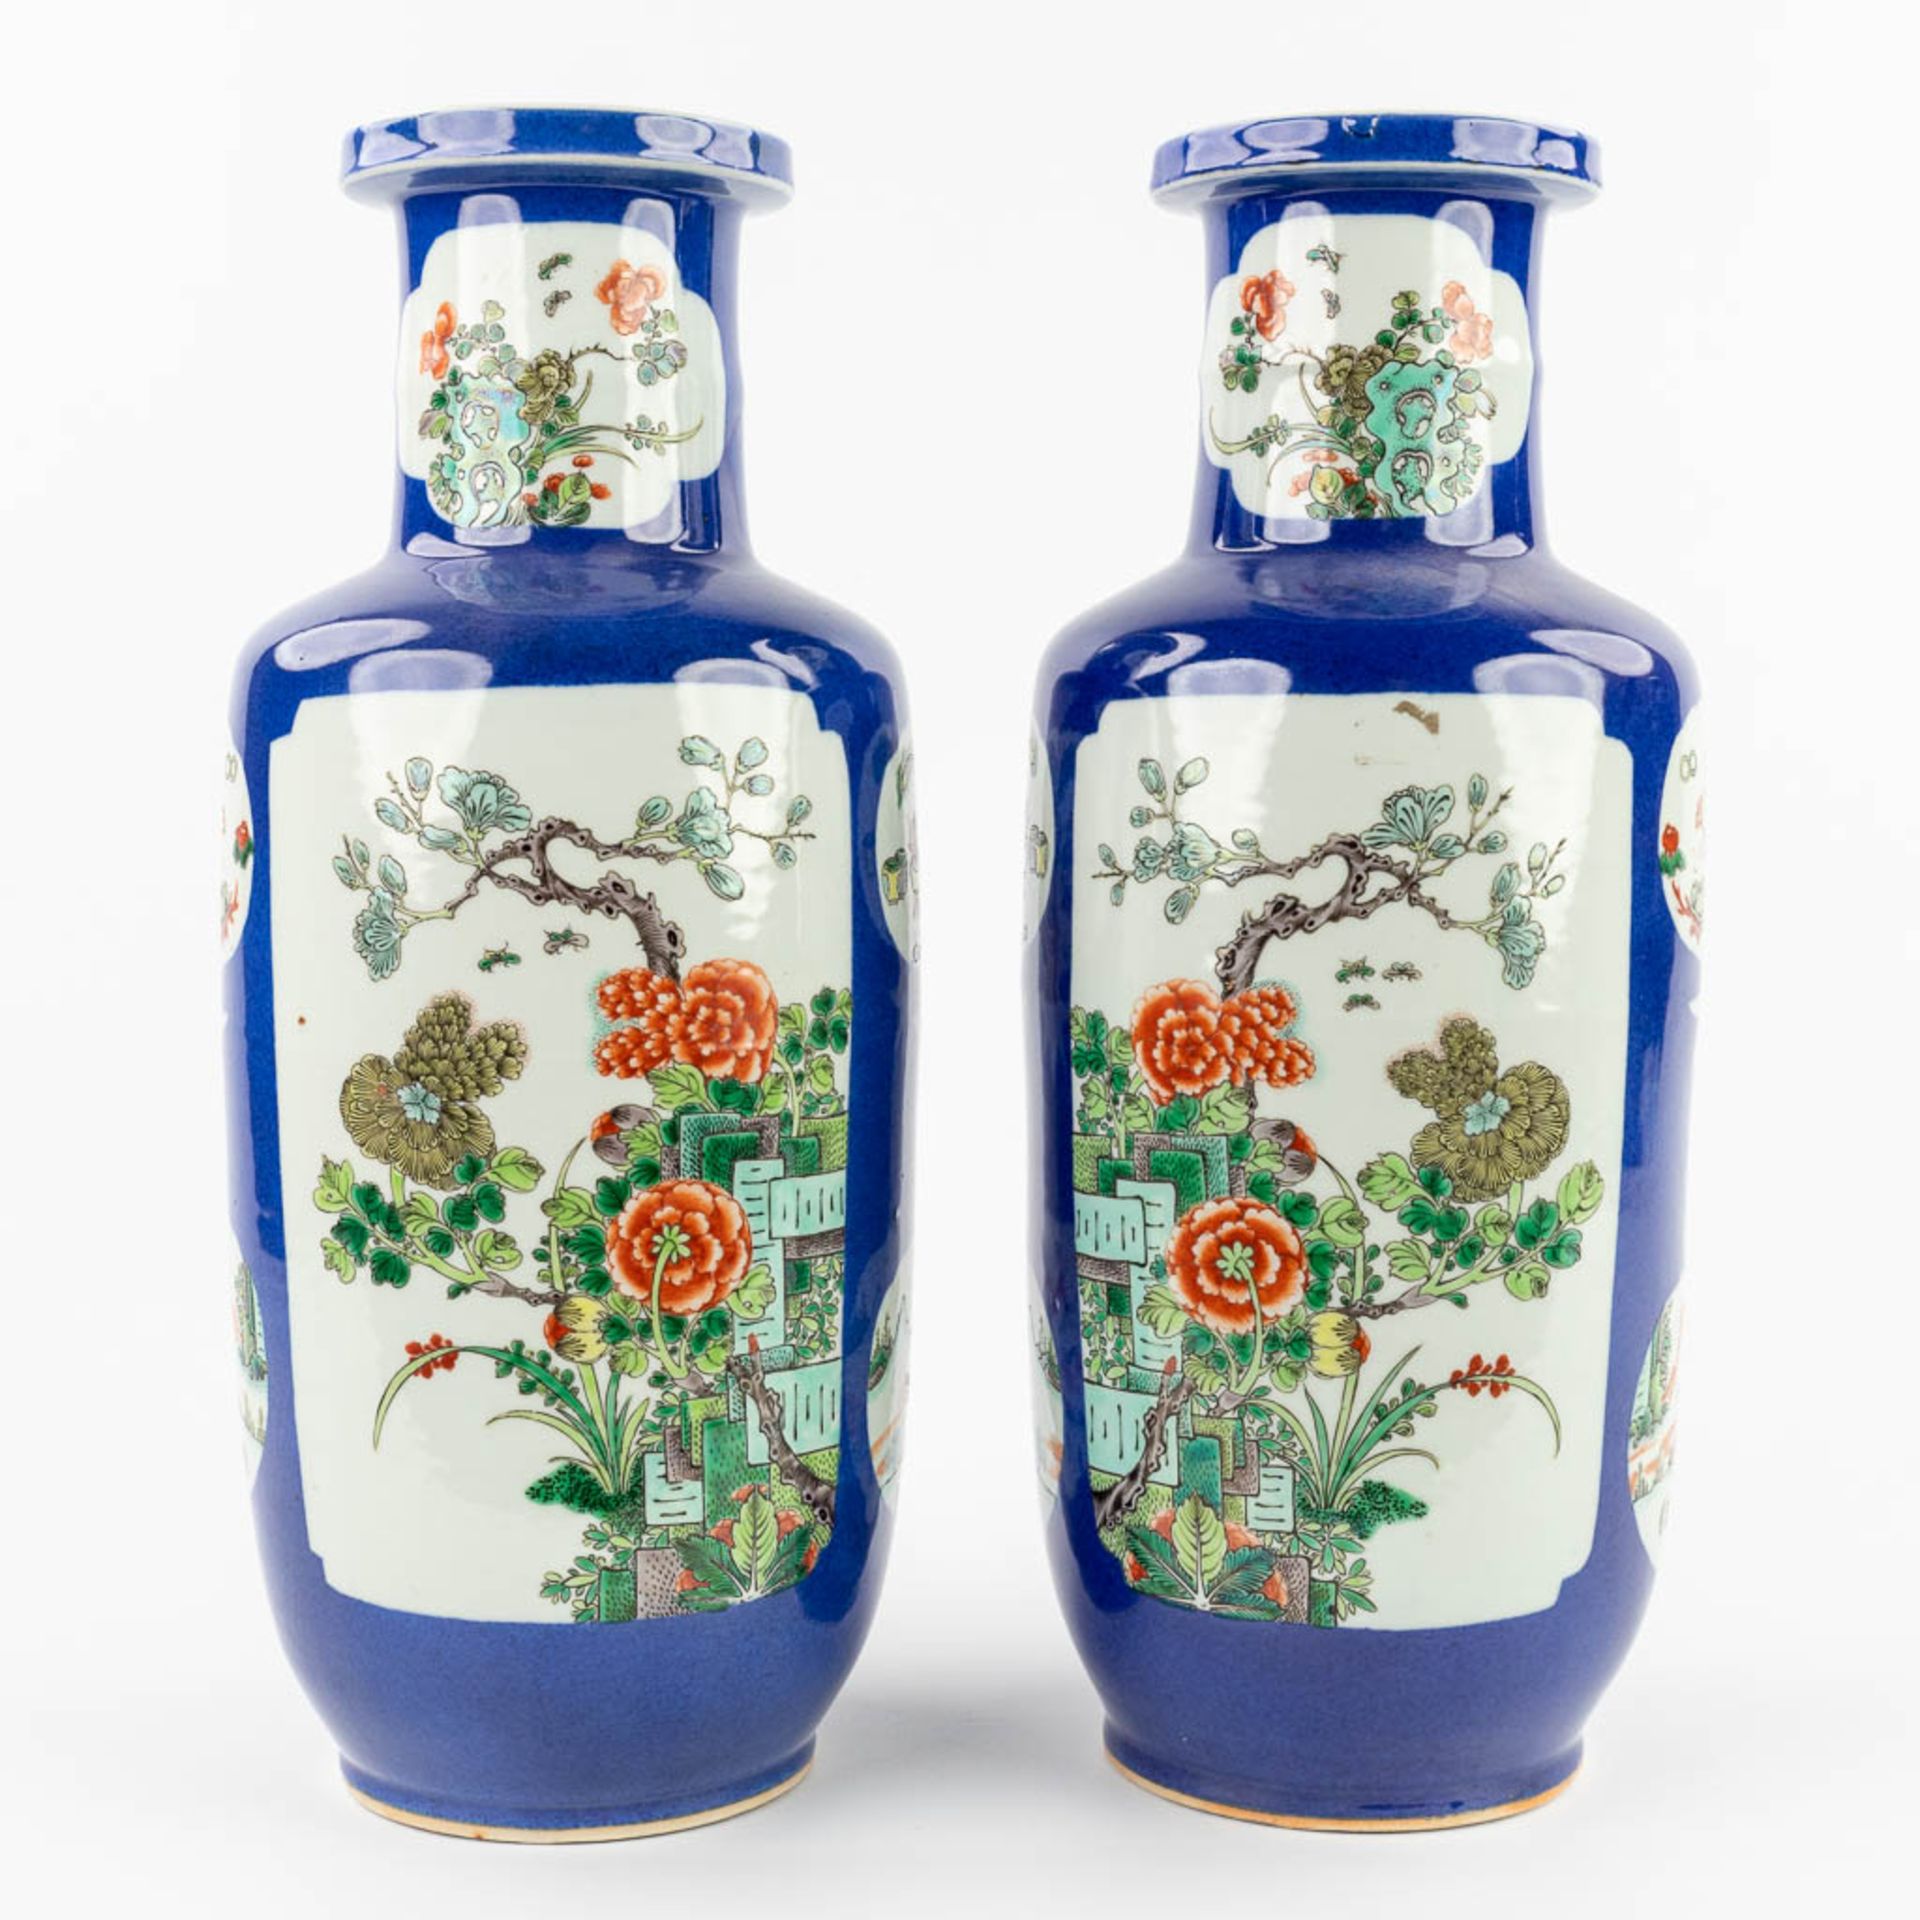 A pair of Chinese vases, decorated with fauna and flora. 20th C. (H:45 x D:18 cm) - Image 4 of 13